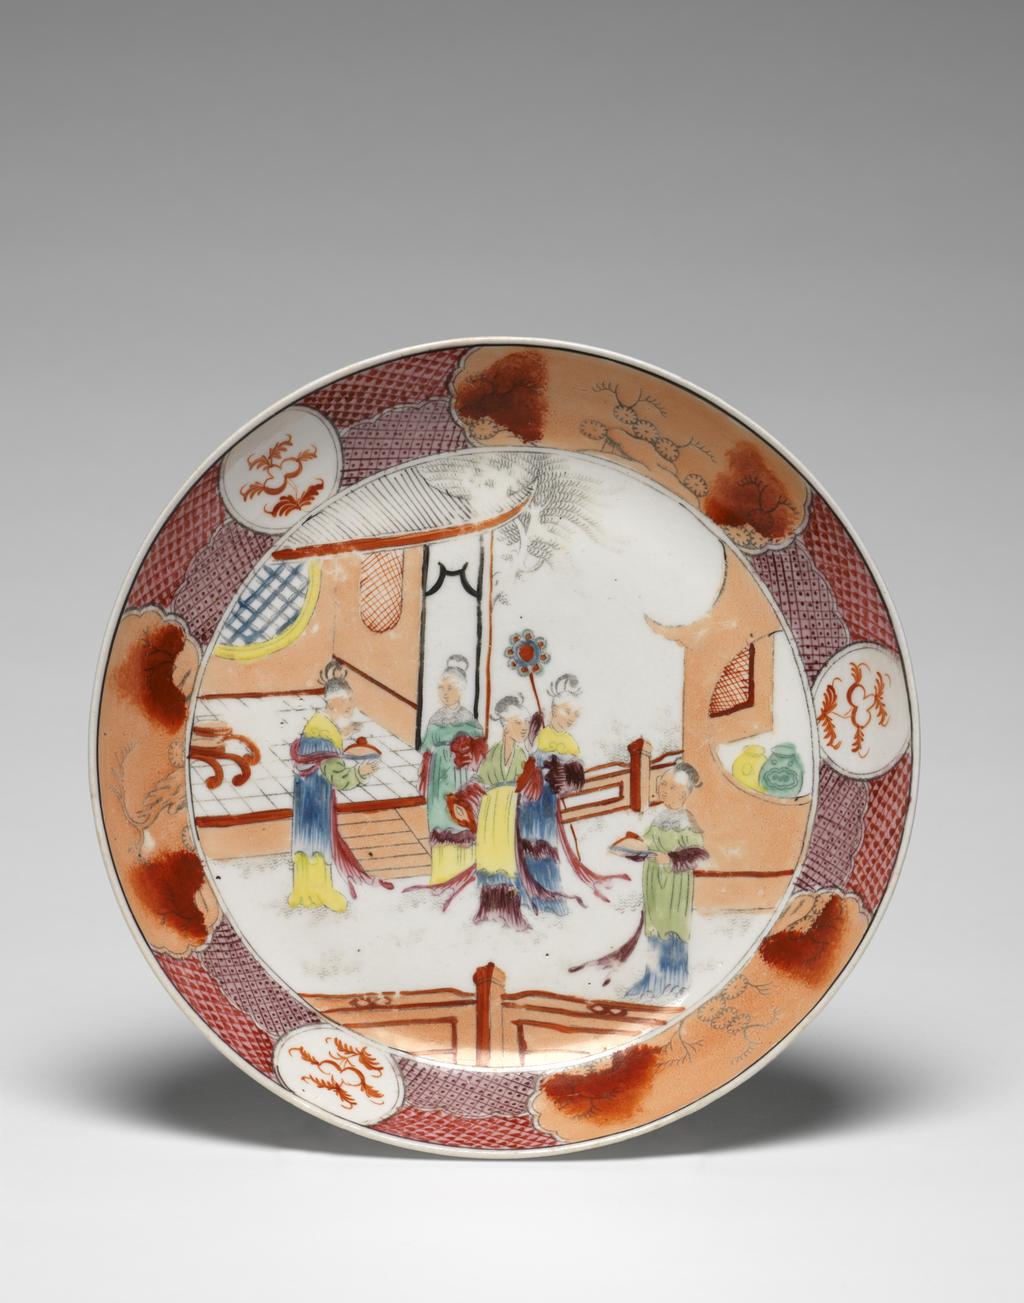 An image of Plate. New Hall Porcelain Factory, Staffordshire. Circular with shallow curved sides, standing on a footring. The centre is decorated with four ladies standing in front of a house or garden pavilion, and another further to the right stands in front of another building in which two jars are standing beside a circular opening. In the foreground thee is a fence. Round the edge there is a border of puce and pink, and purple and pink trellis patterns broken by three large shaped oblong panels enclosing red and black plants on an apricot ground, and three small circular panels with a red plant on a white ground. A black line runs round the rim. Pattern 621. Hybrid hard-paste porcelain, transfer-printed overglaze in black and painted in enamels, height, whole, 3.8 cm, diameter, whole, 20.4 cm, circa 1800. Chinese Style.